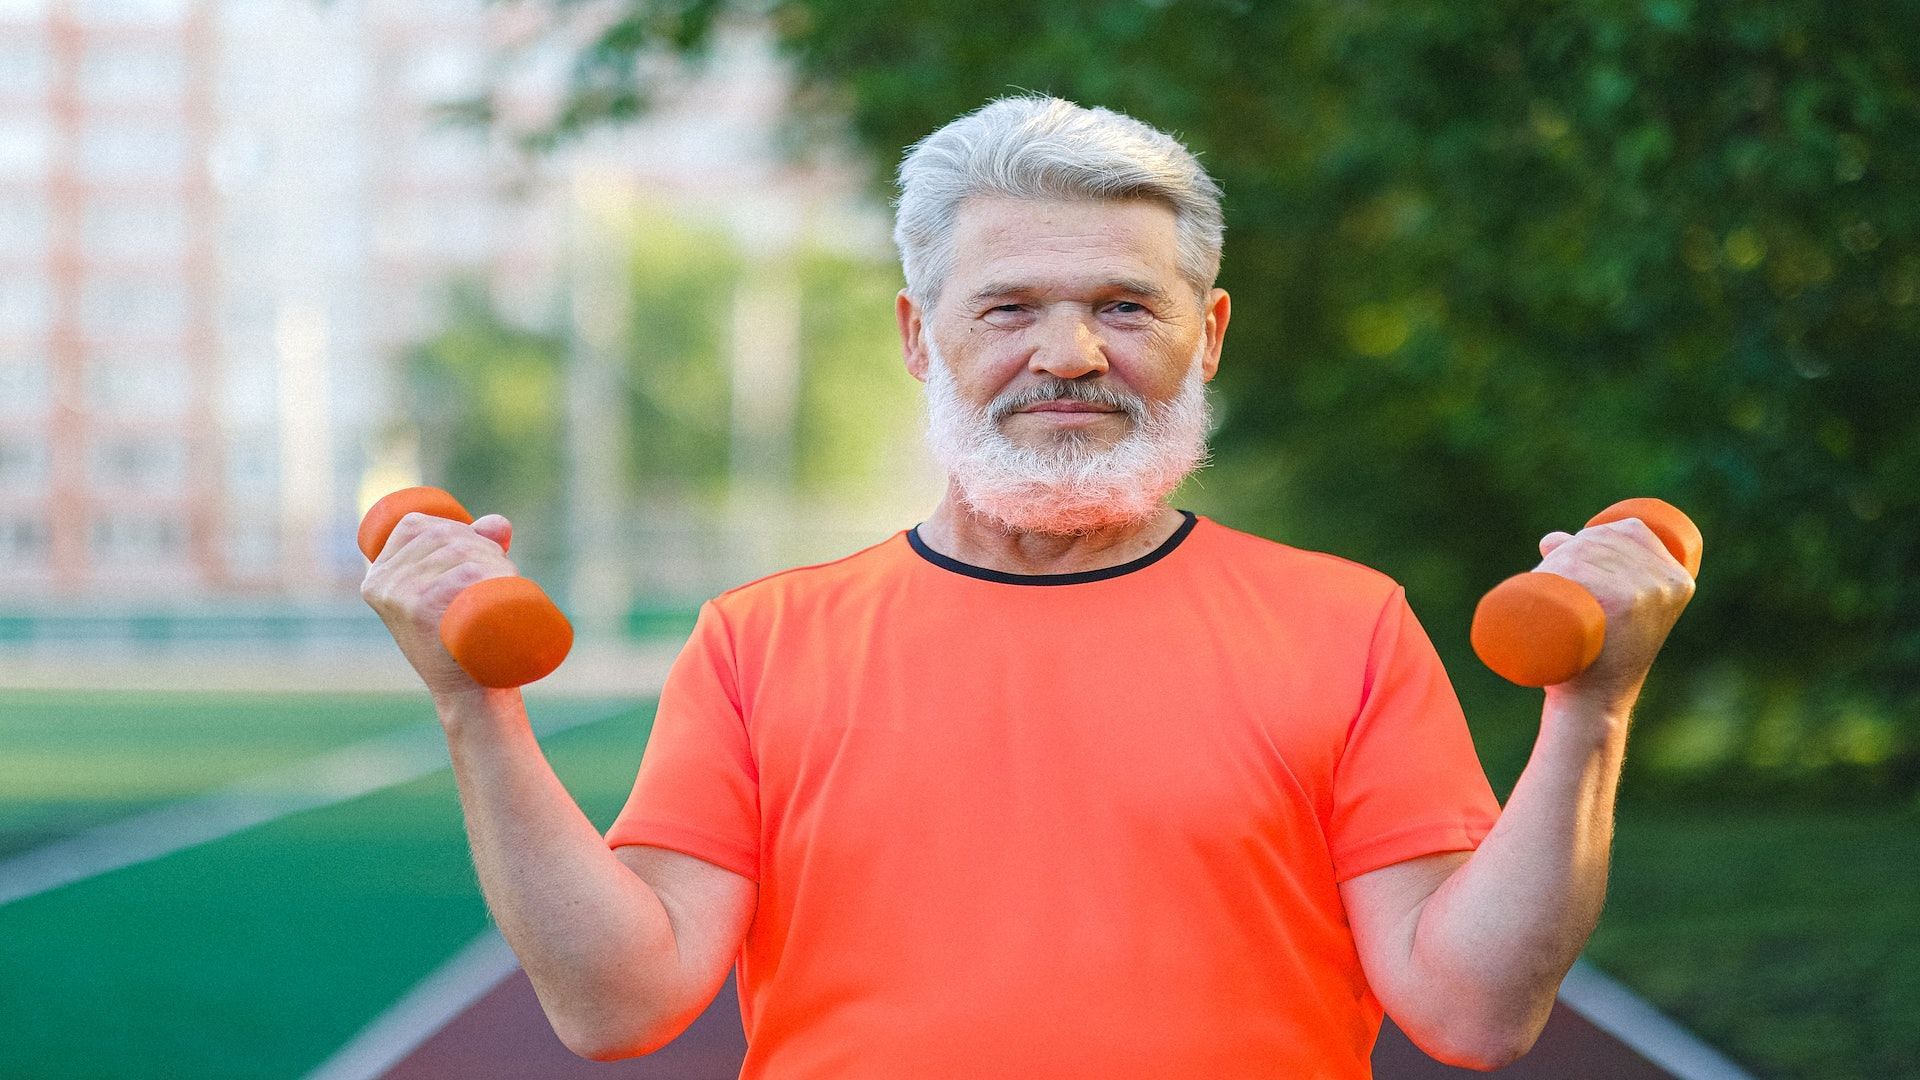 Strength training in your older years. Image via Pexels/Anna Shvets